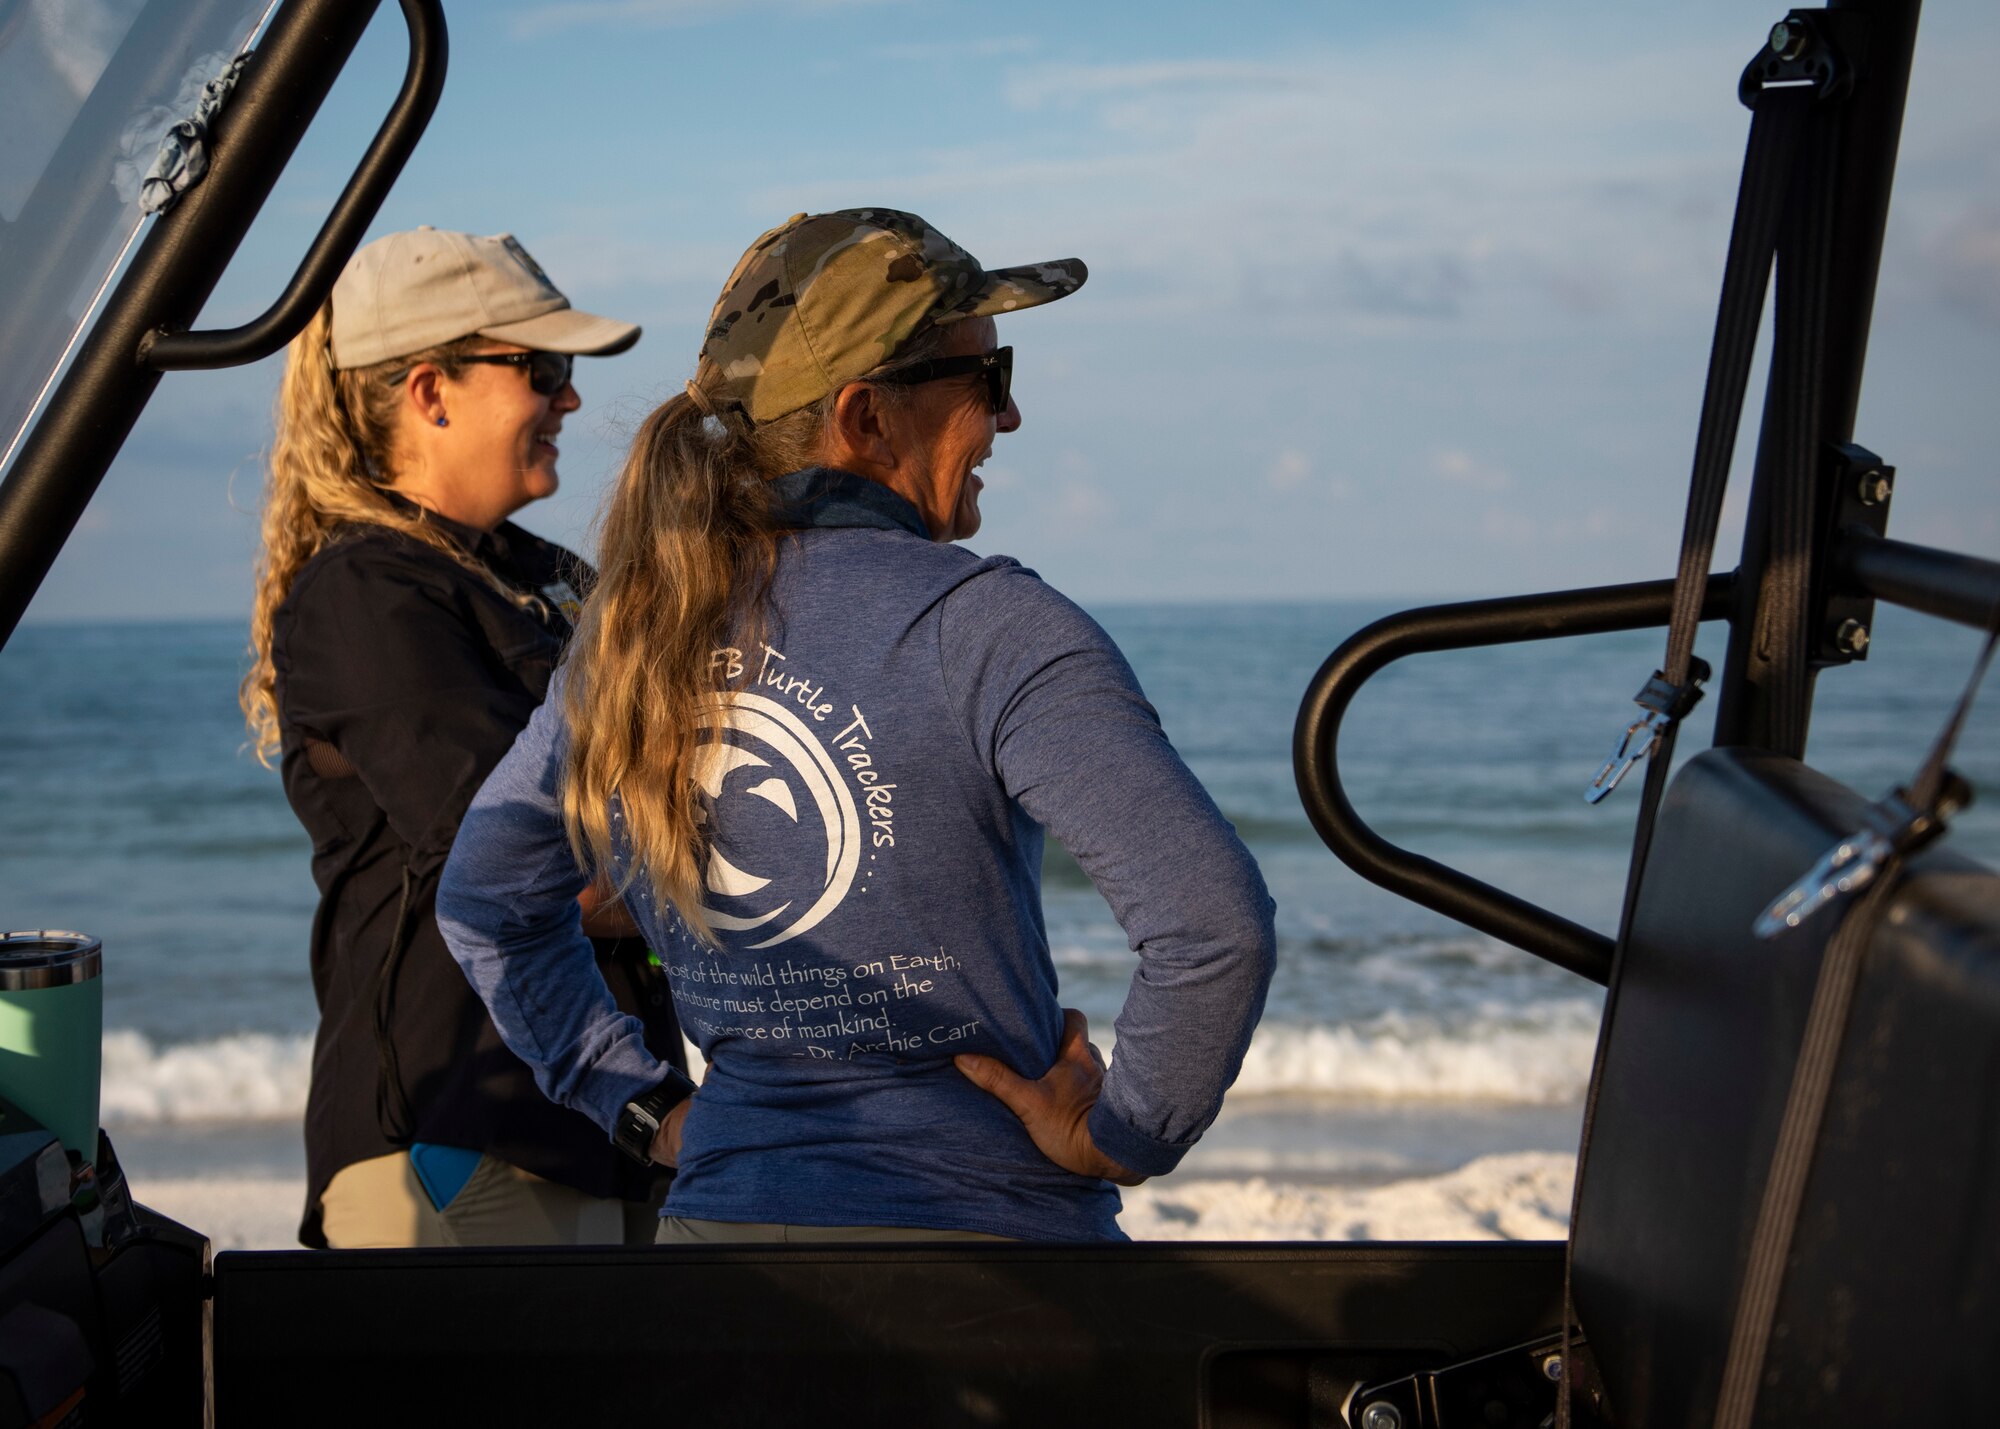 Danielle Bumgardner, U.S. Fish and Wildlife Services biologist, and Rebecca Johnson, Tyndall Natural Resources wildlife and biological technician, look for sea turtle trails on the beach at Tyndall Air Force Base, Florida, June 5, 2019.